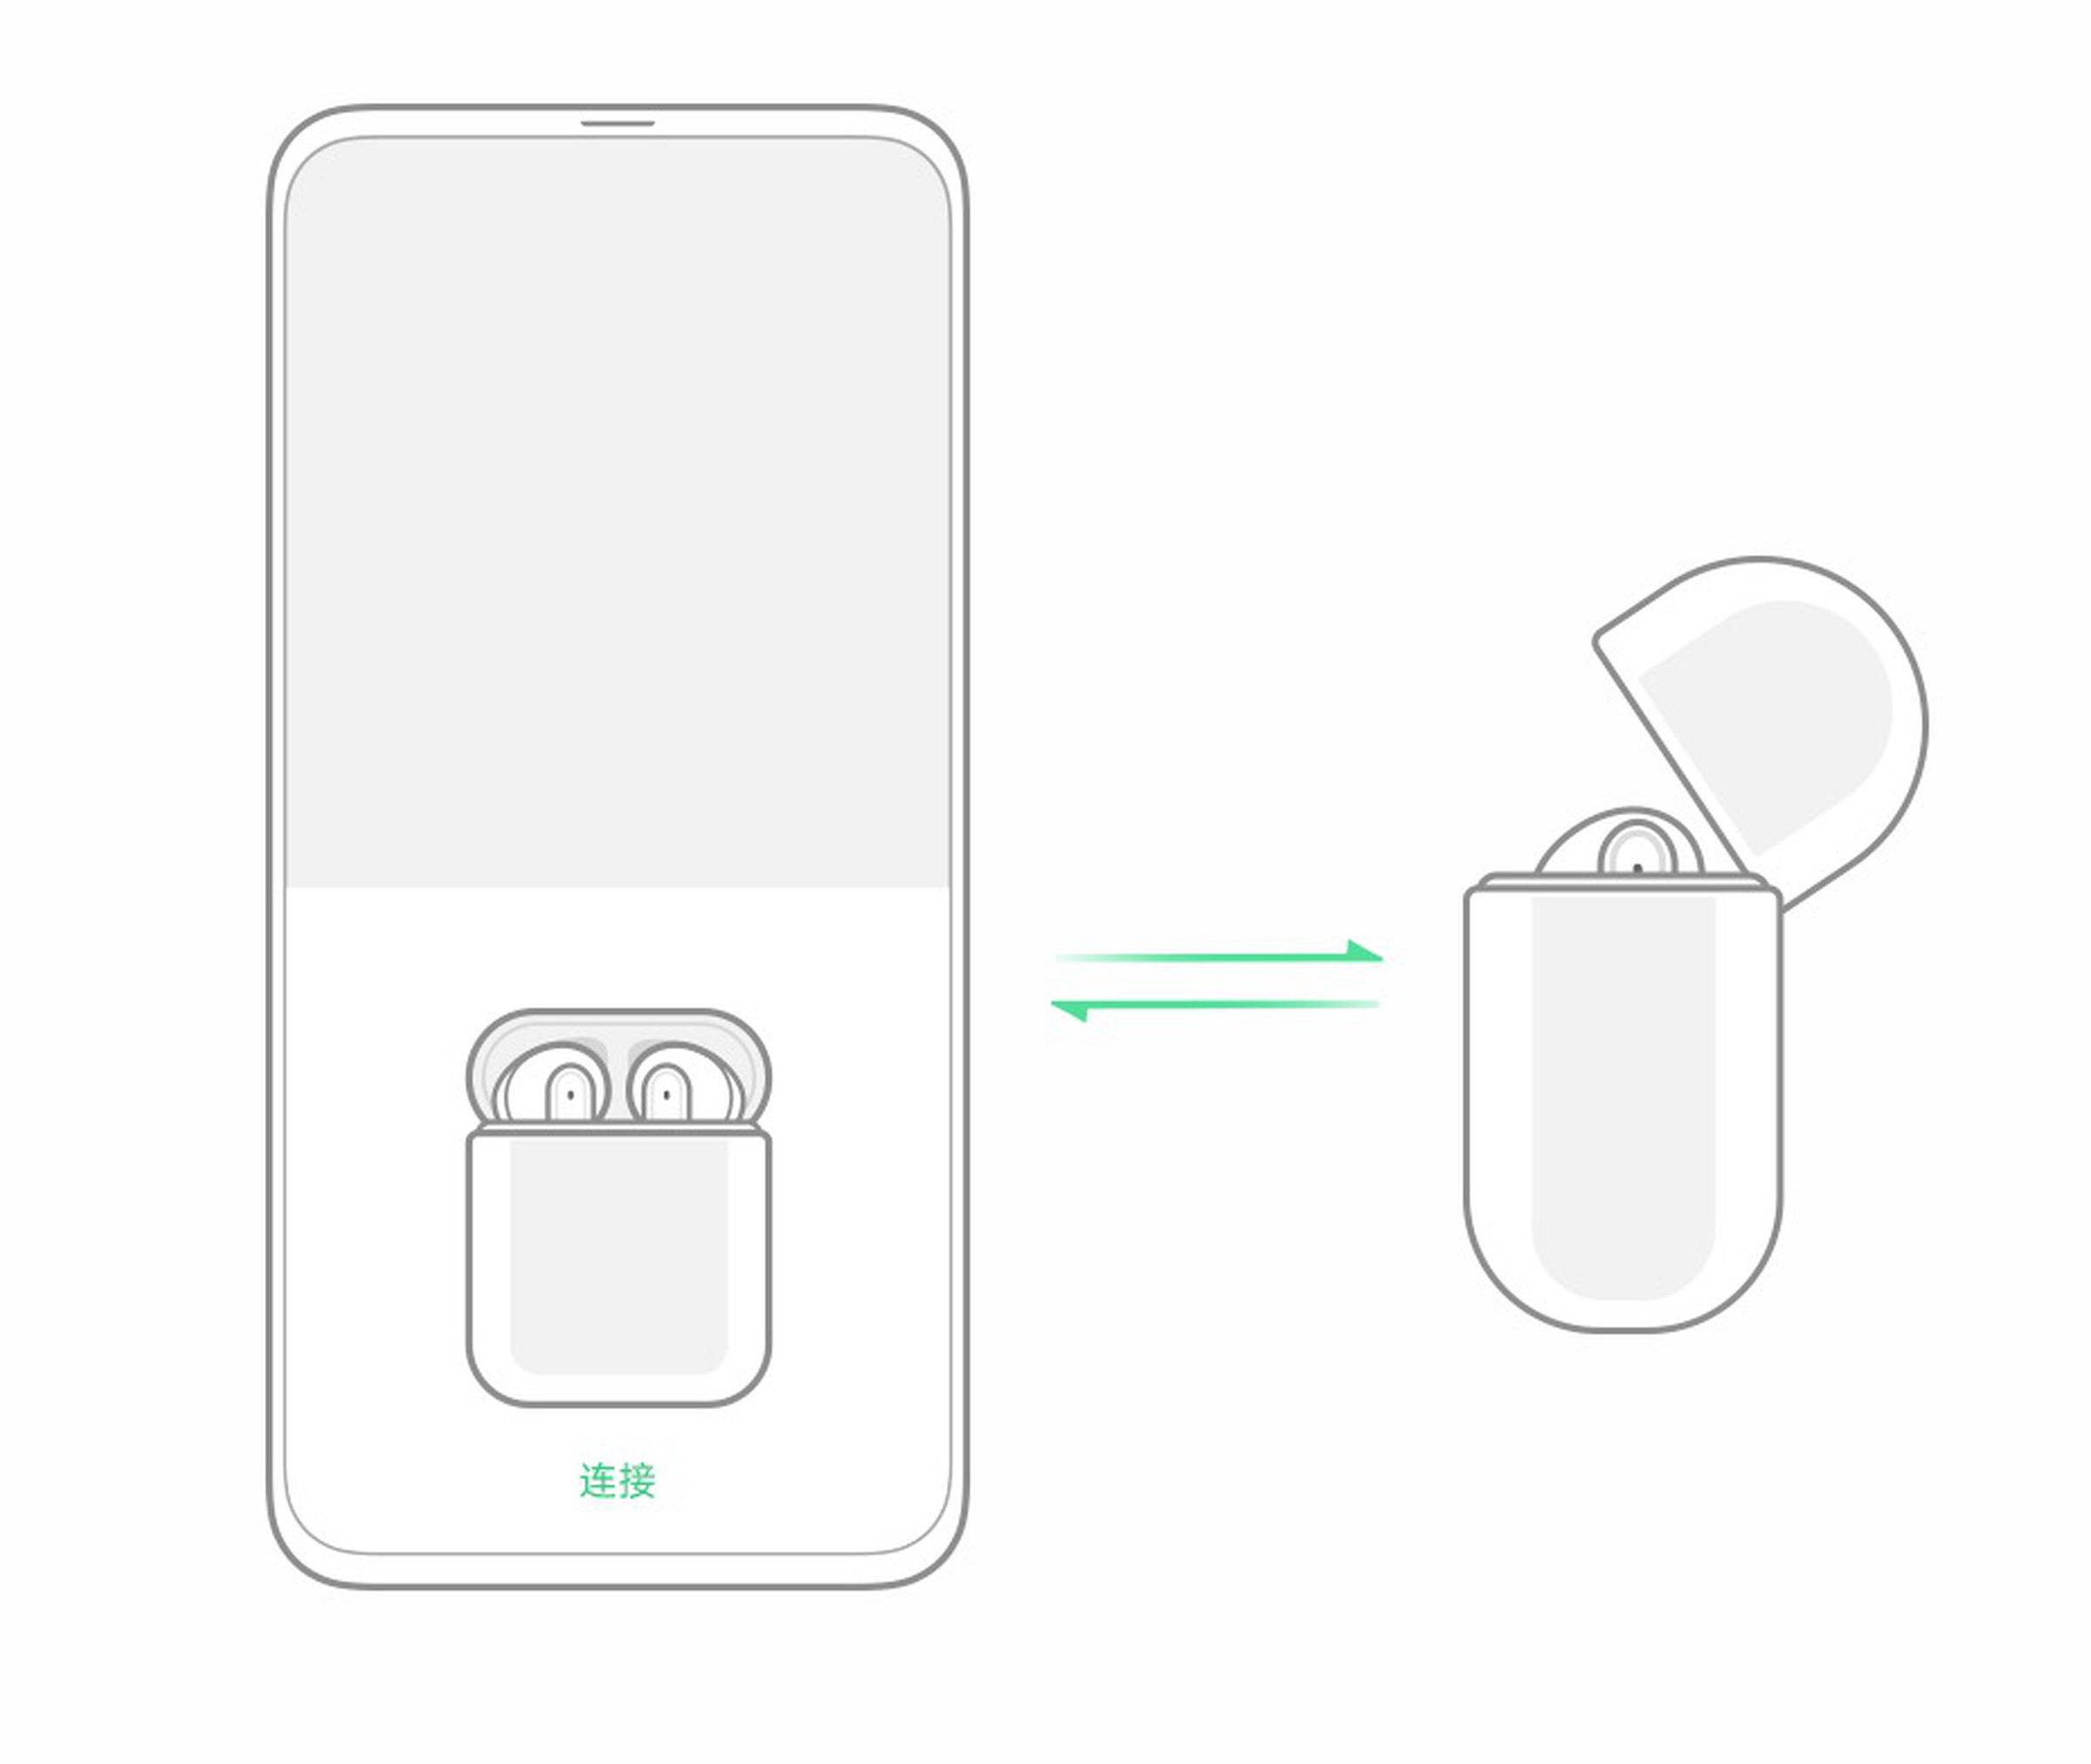 Illustration suggests AirPods-like fast pairing.